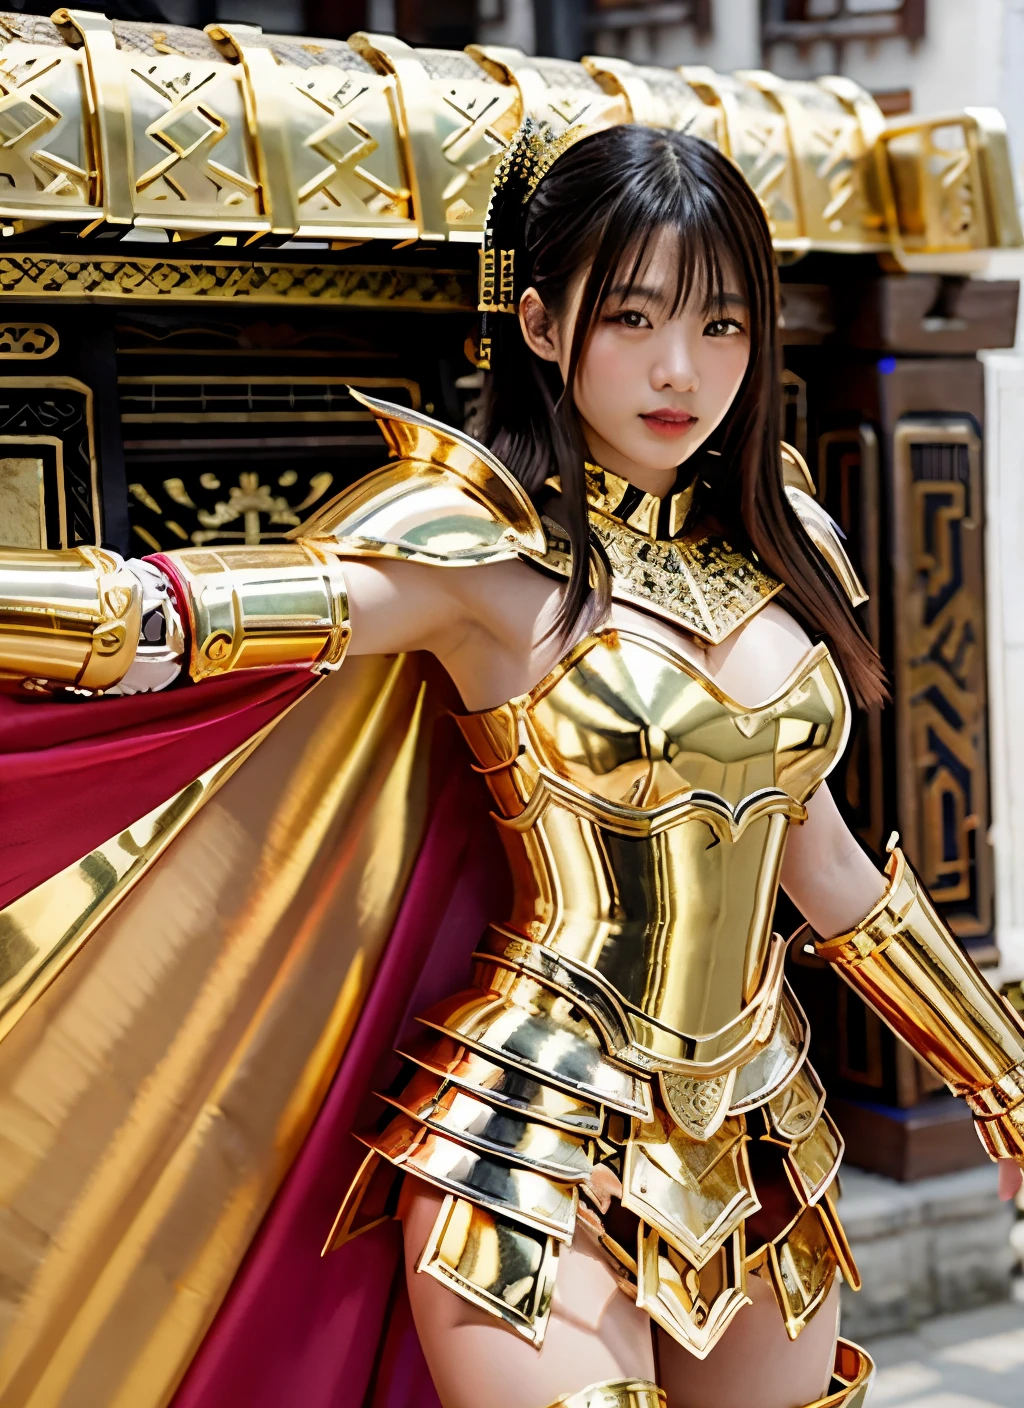 ultra‐realistic, sharp-focused, a beautiful 17 year old female knight, a model with ethnicity mix of Korean and Chinese, wearing sexy shiny gold armor in style of ancient Thai art, highly detailed and intricate armor, stacked shoulder armor, multi-piece metal skirt partially open, partially nude thigh, partially-visible black lingerie, big deep purple cape, --v 4-